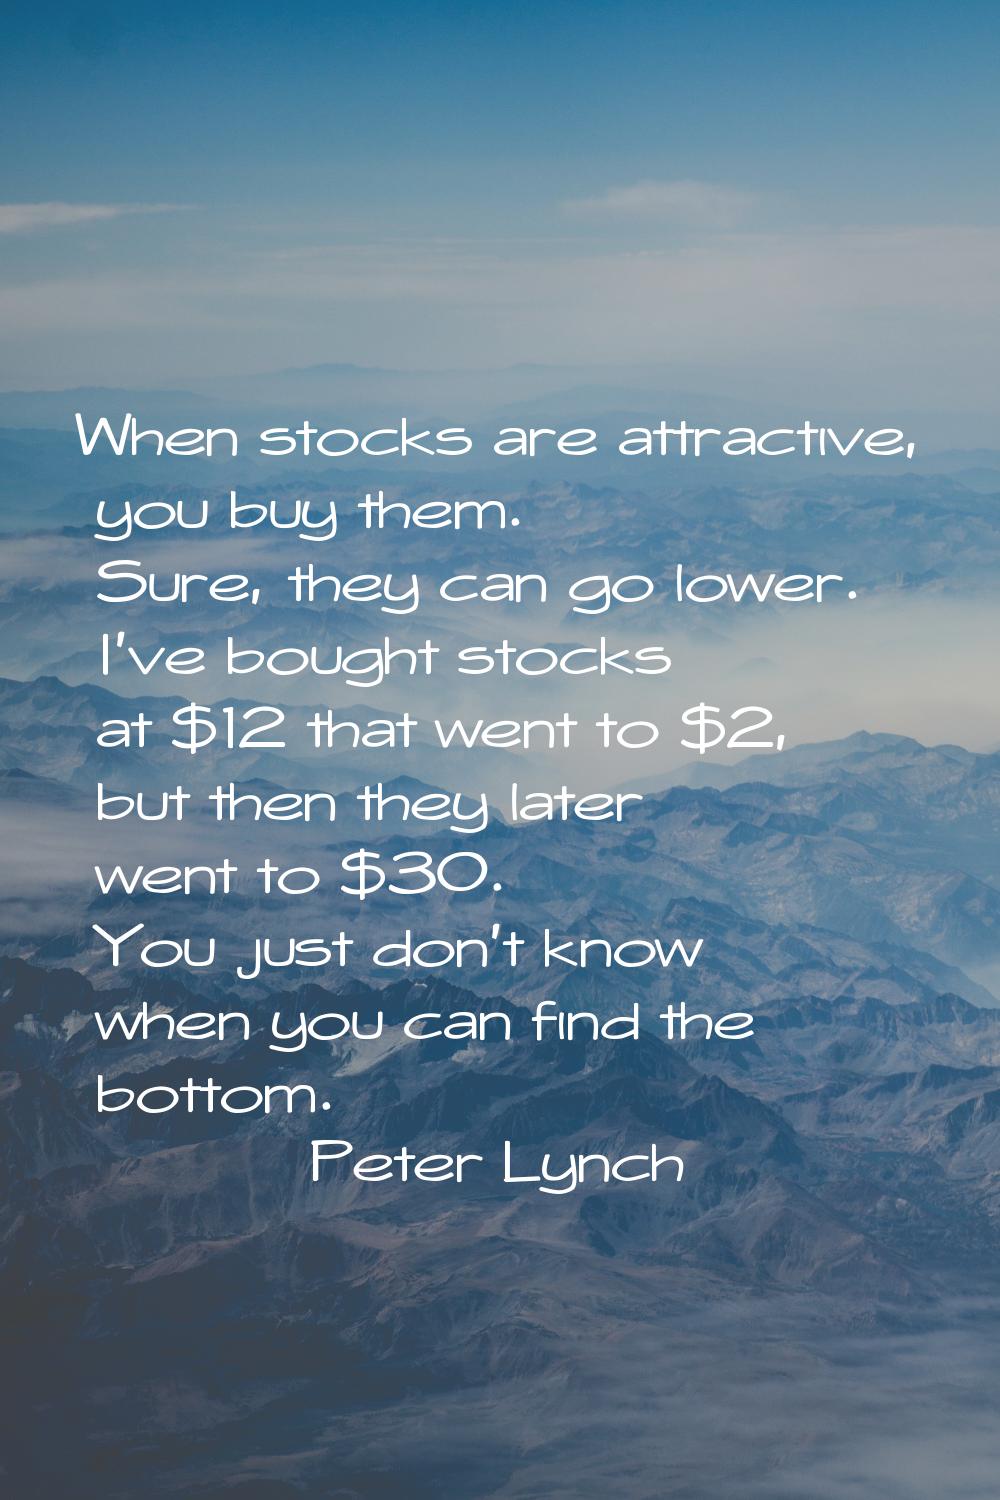 When stocks are attractive, you buy them. Sure, they can go lower. I've bought stocks at $12 that w